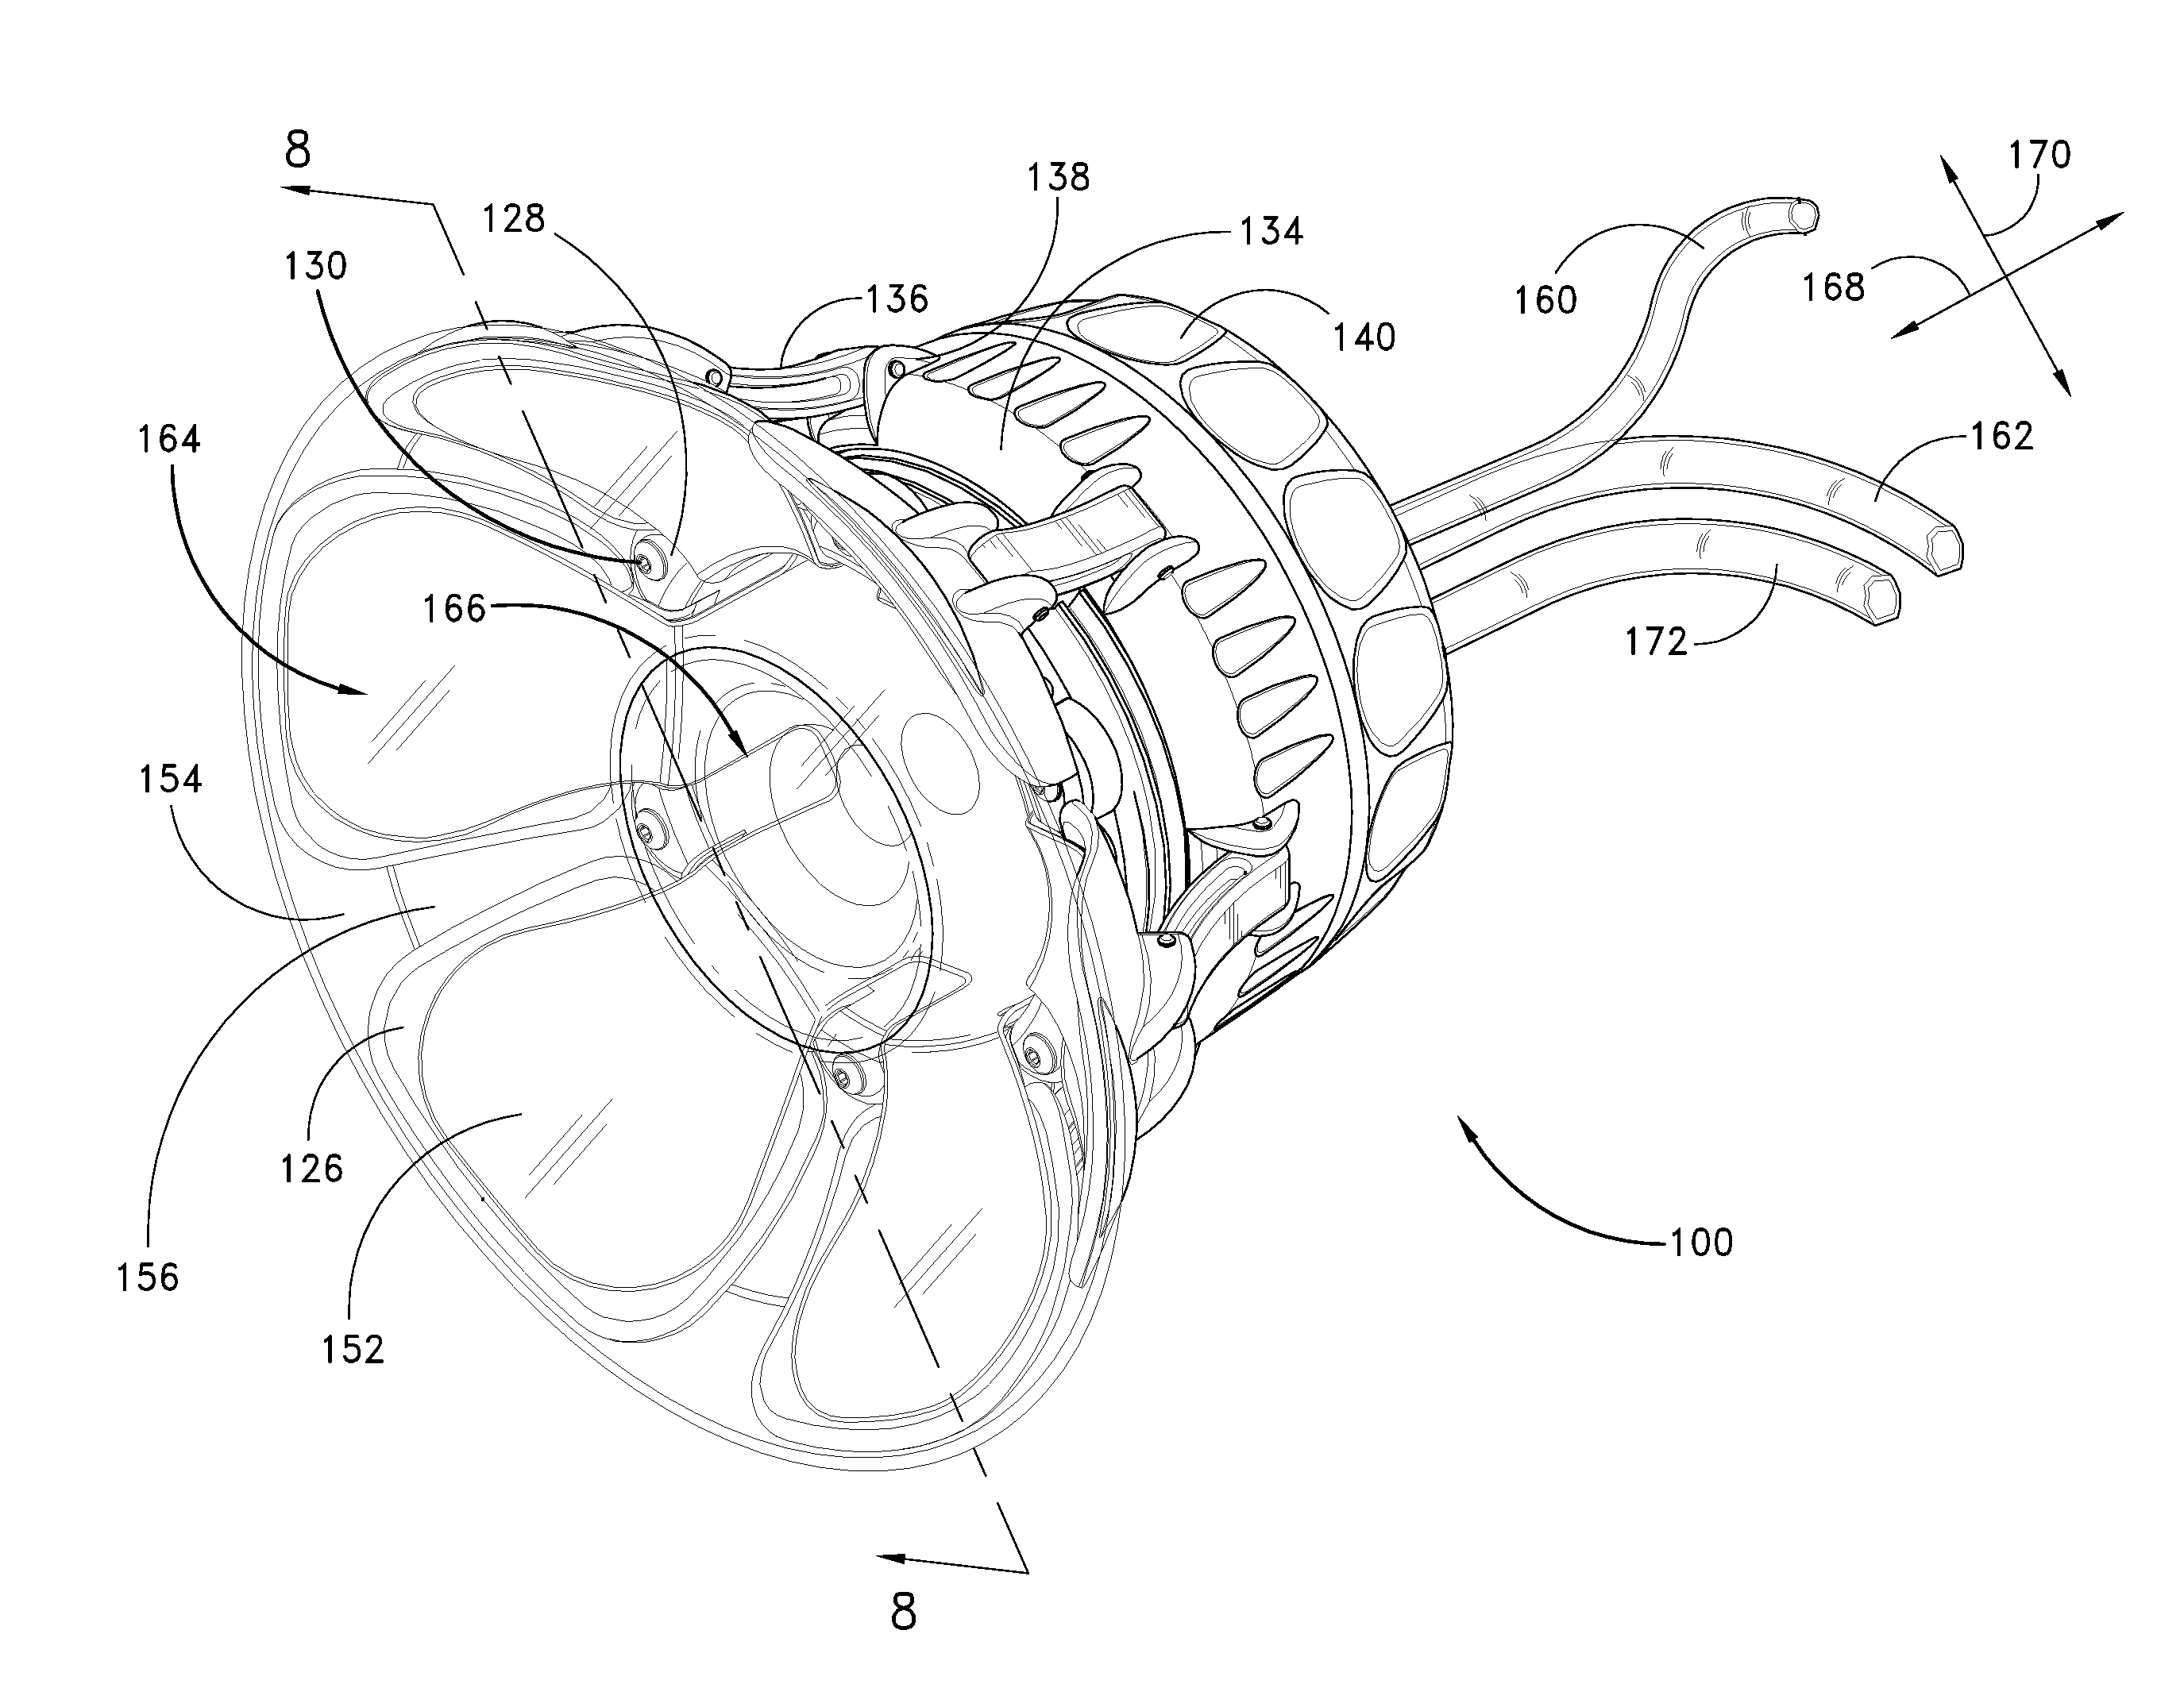 Disposable patient interface for intraductal fluid aspiration system